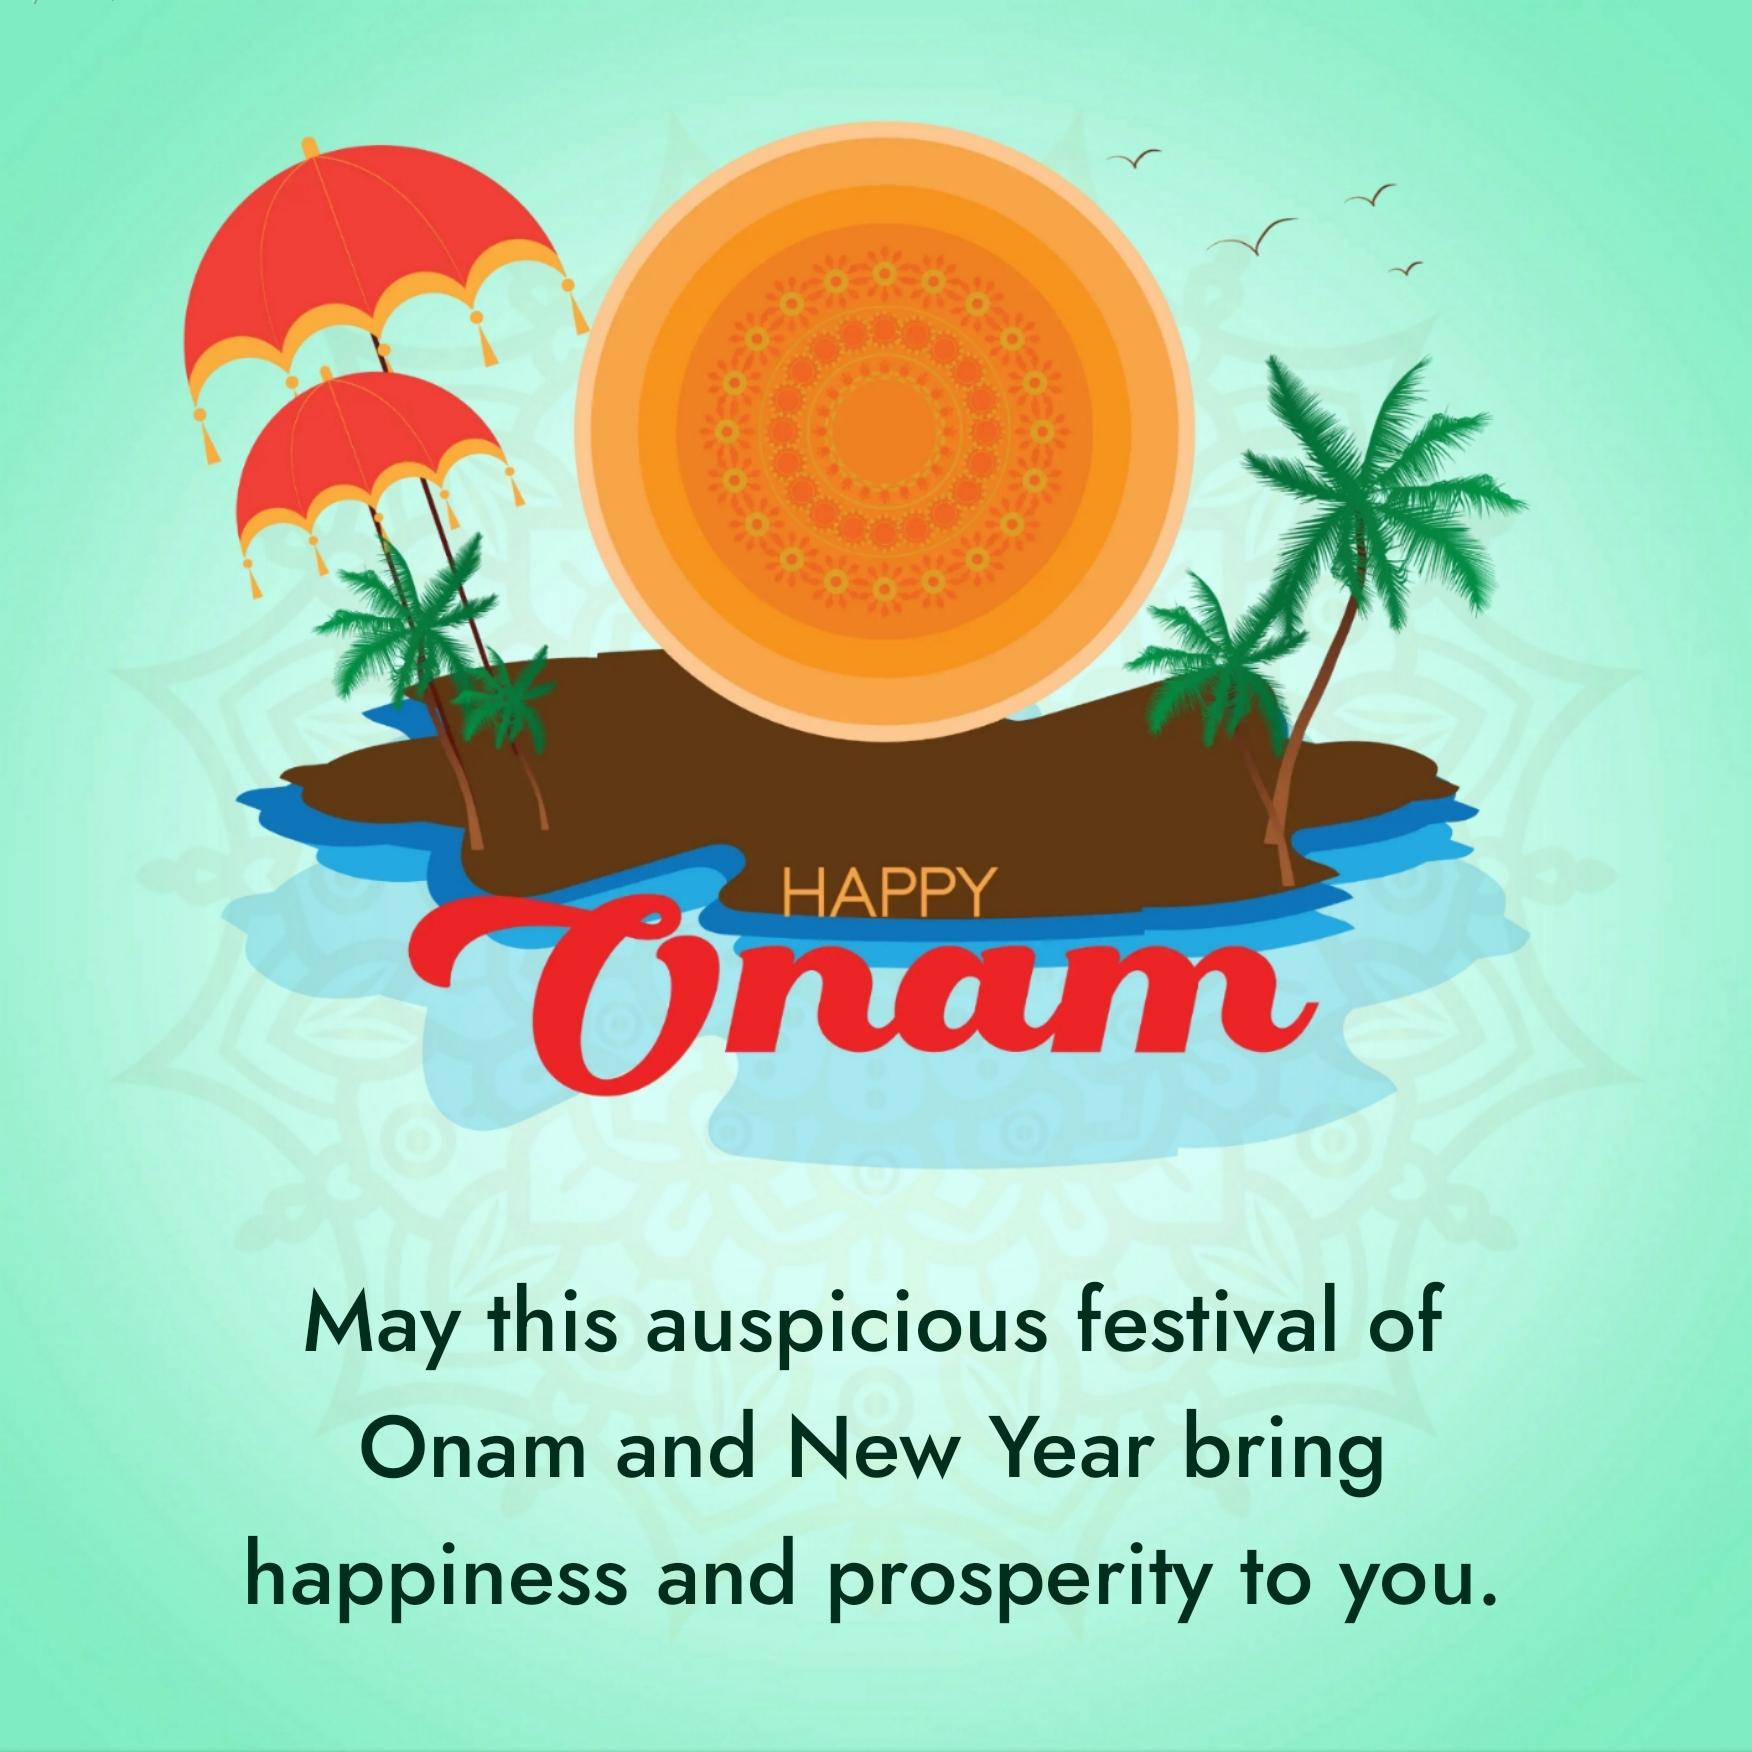 May this auspicious festival of Onam and New Year bring happiness